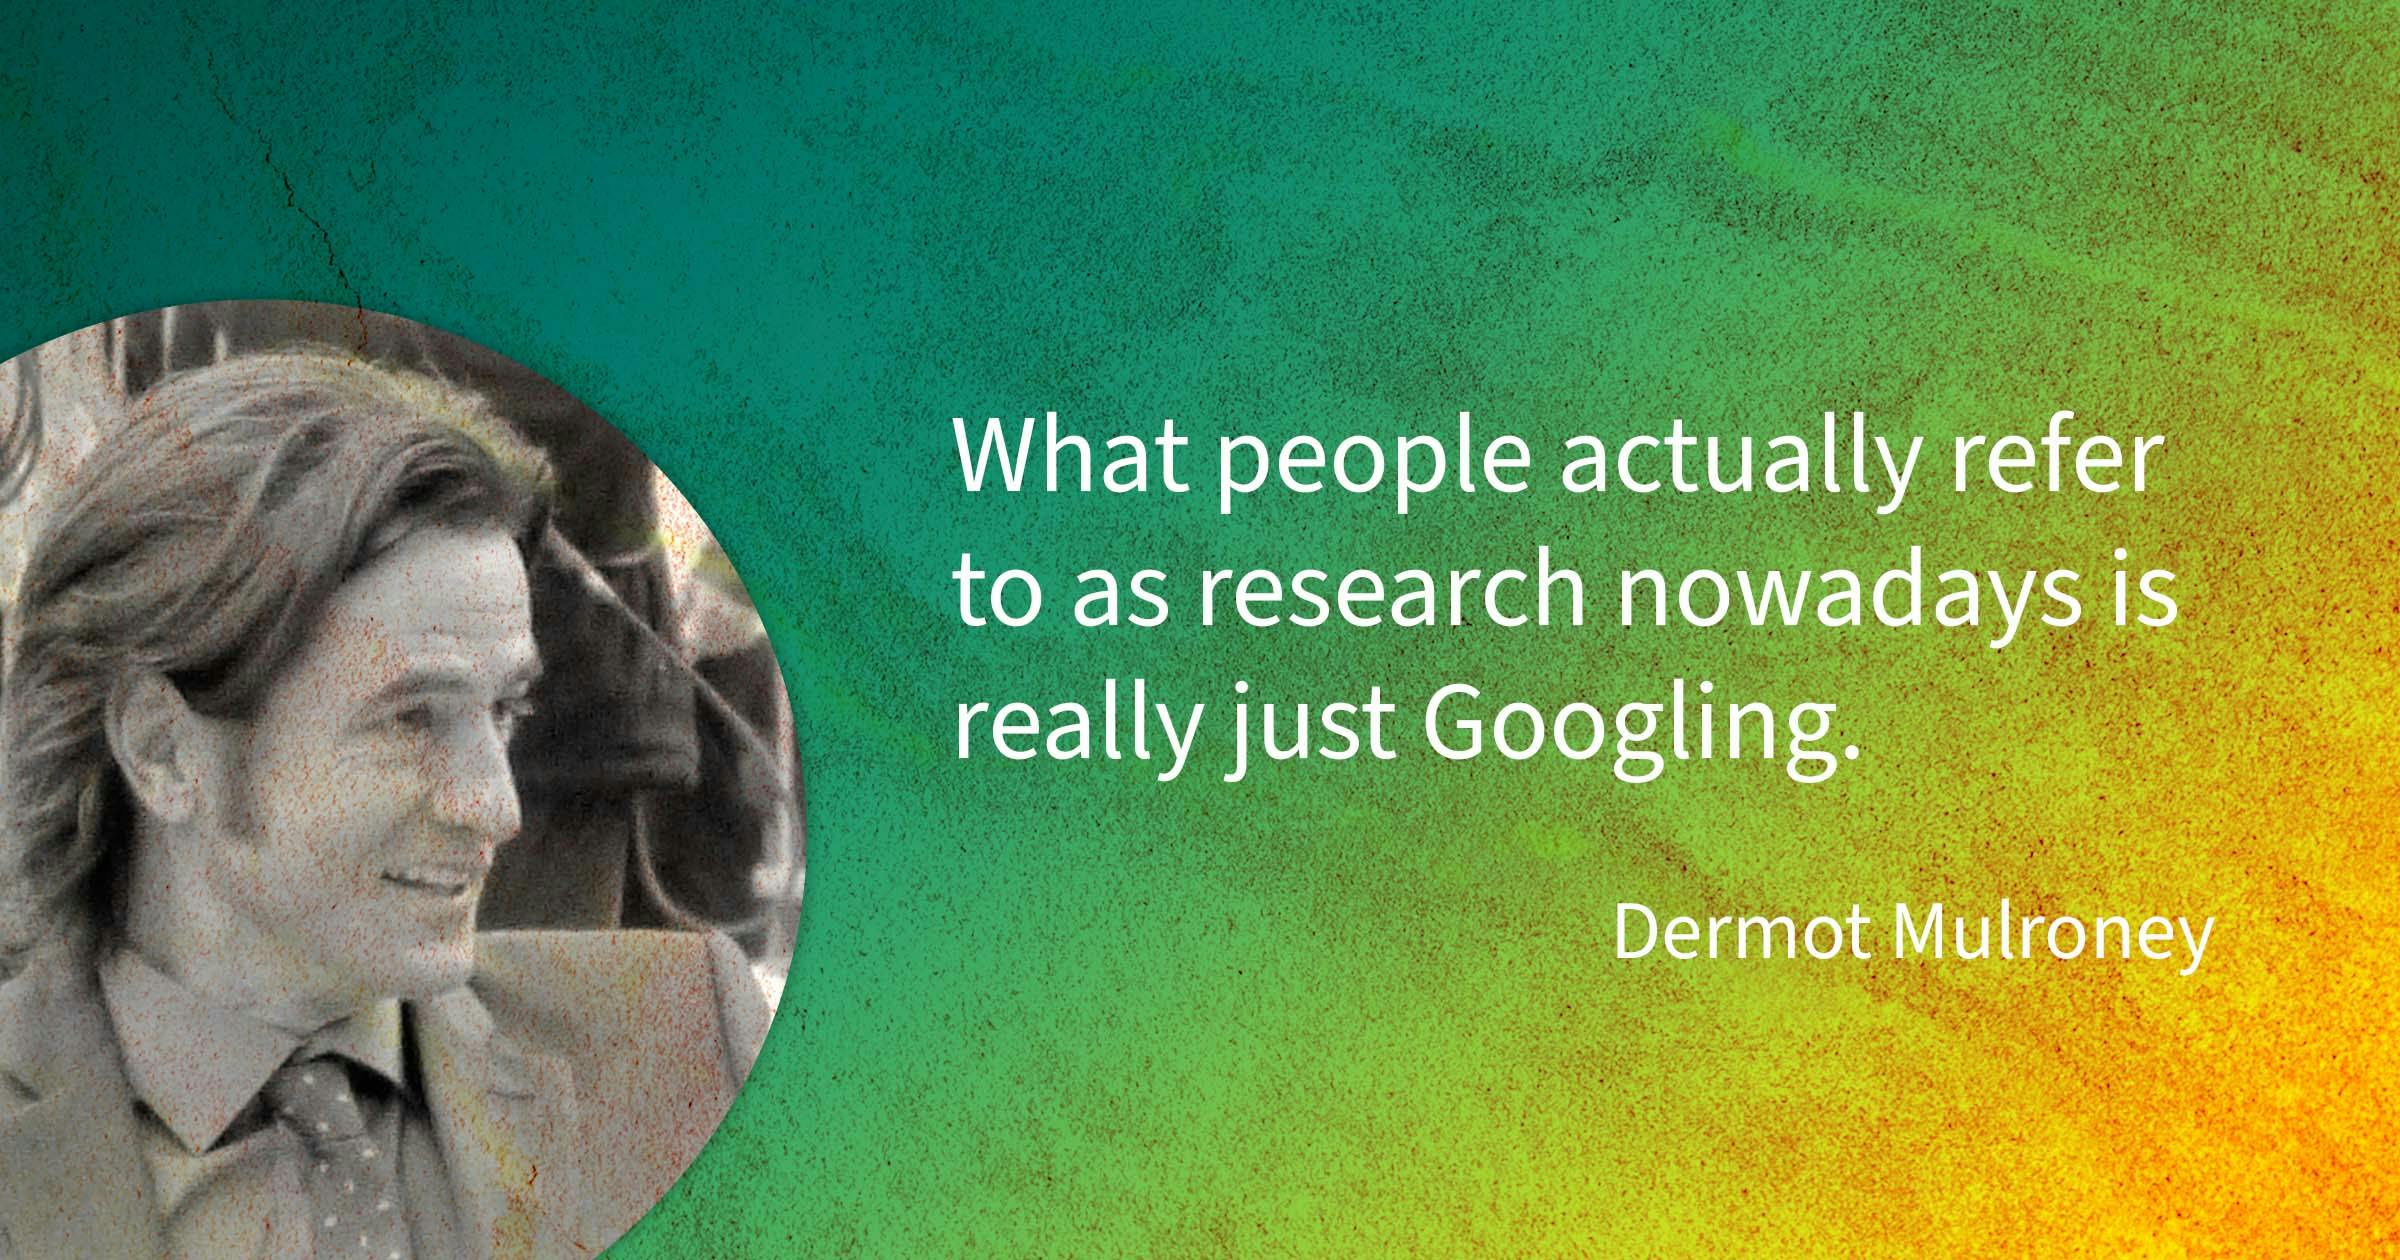 Dermot Mulroney quote: What people actually refer to as research nowadays is really just Googling.